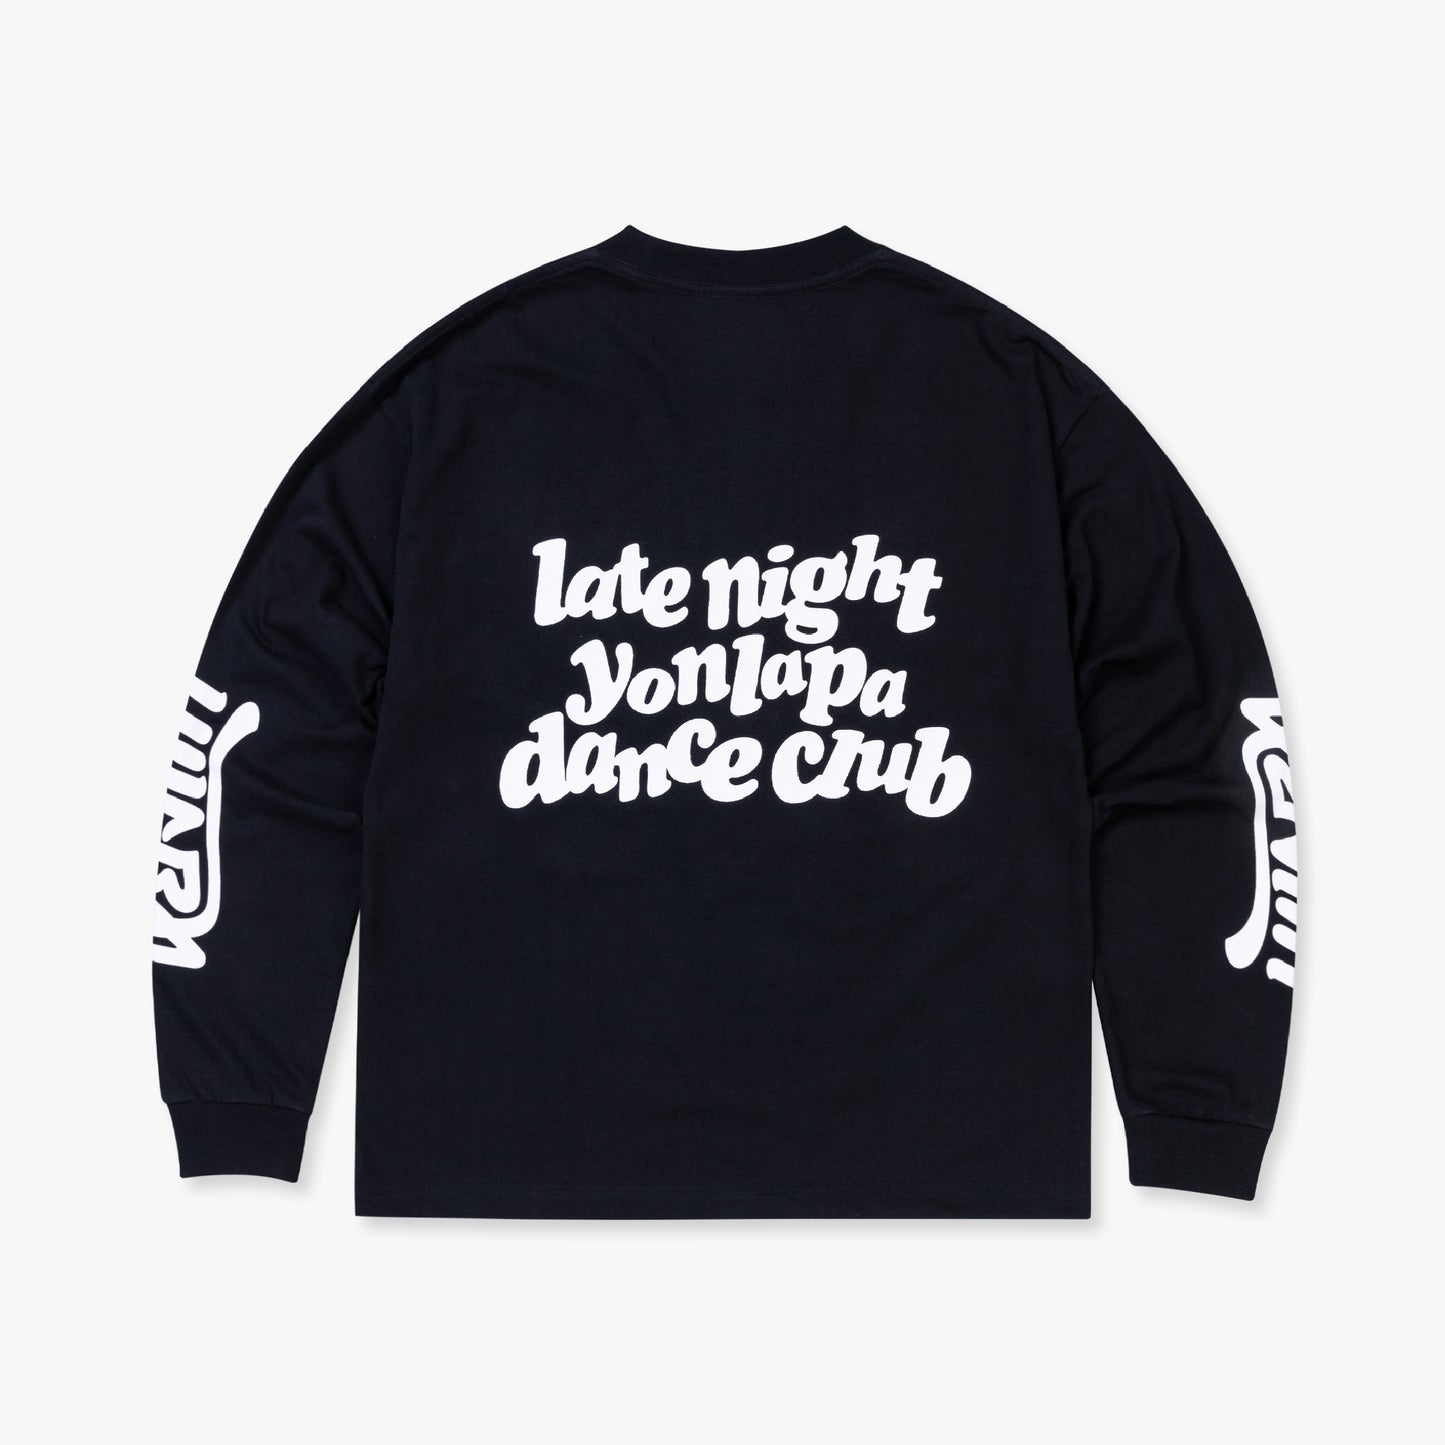 4 ROESE Party Long Sleeve Tee(Black)